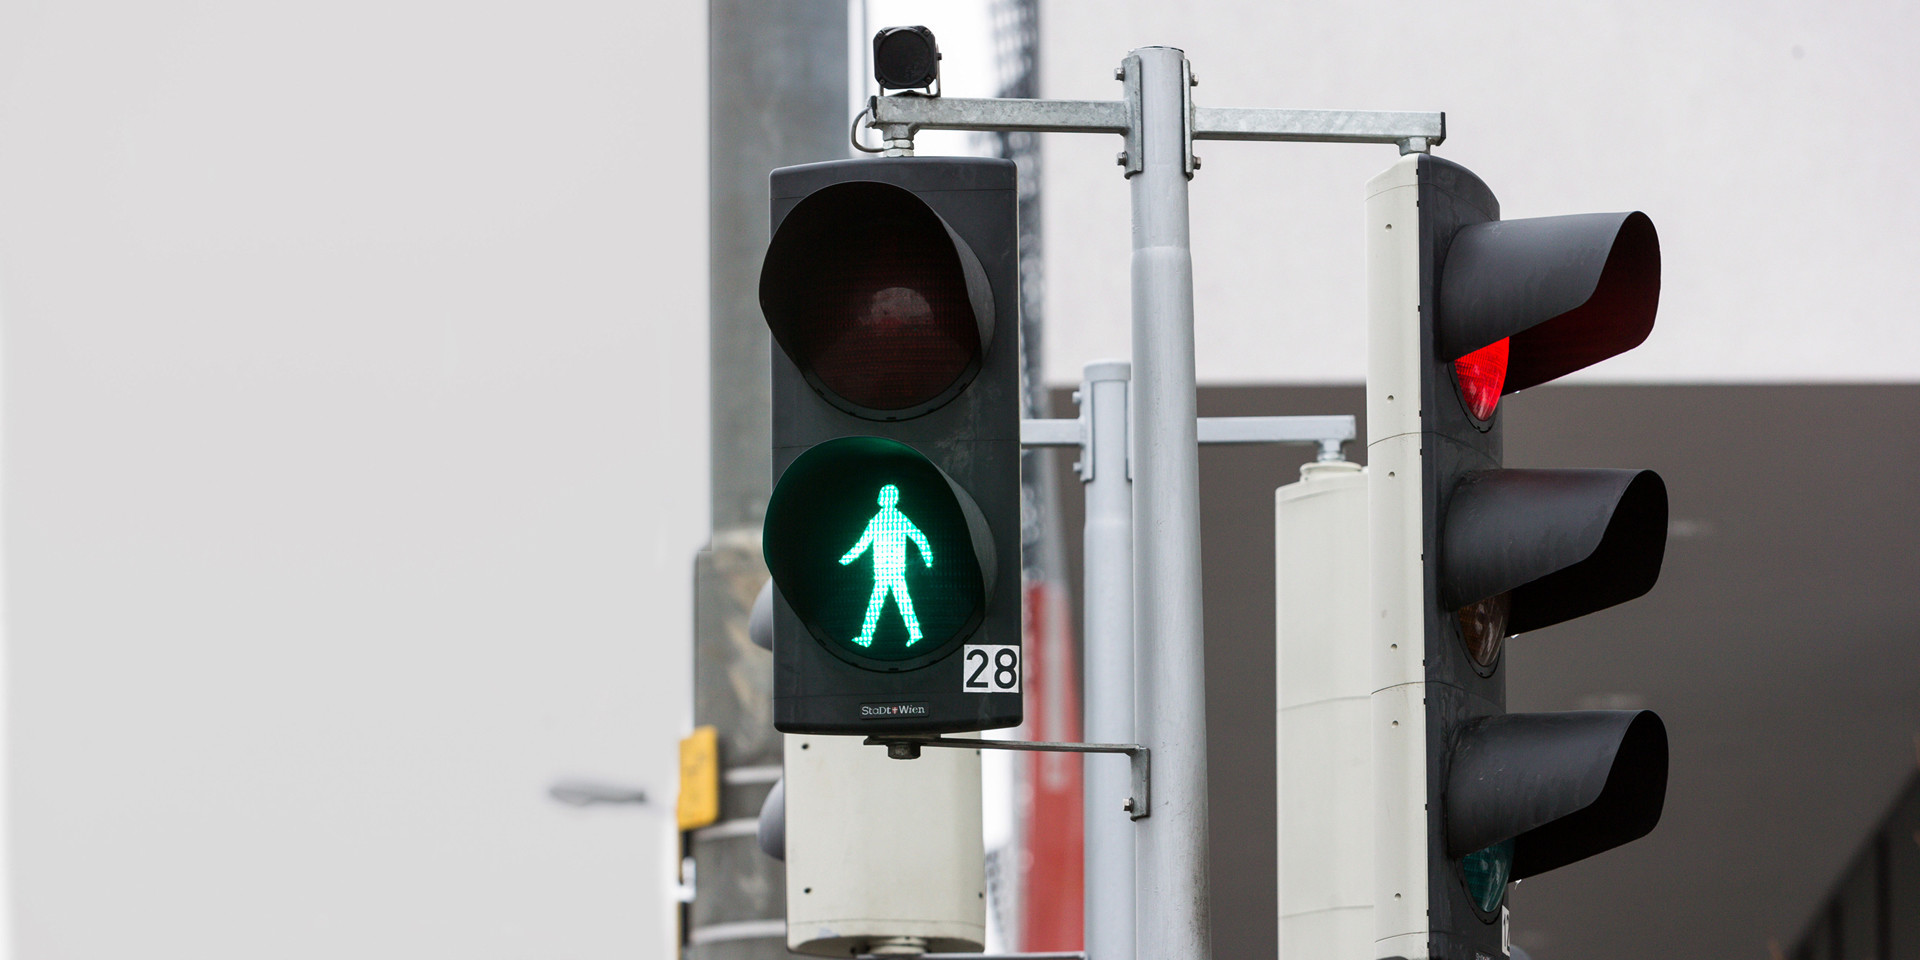 Vienna will install smart traffic lights that will recognise when pedestrians want to cross the street